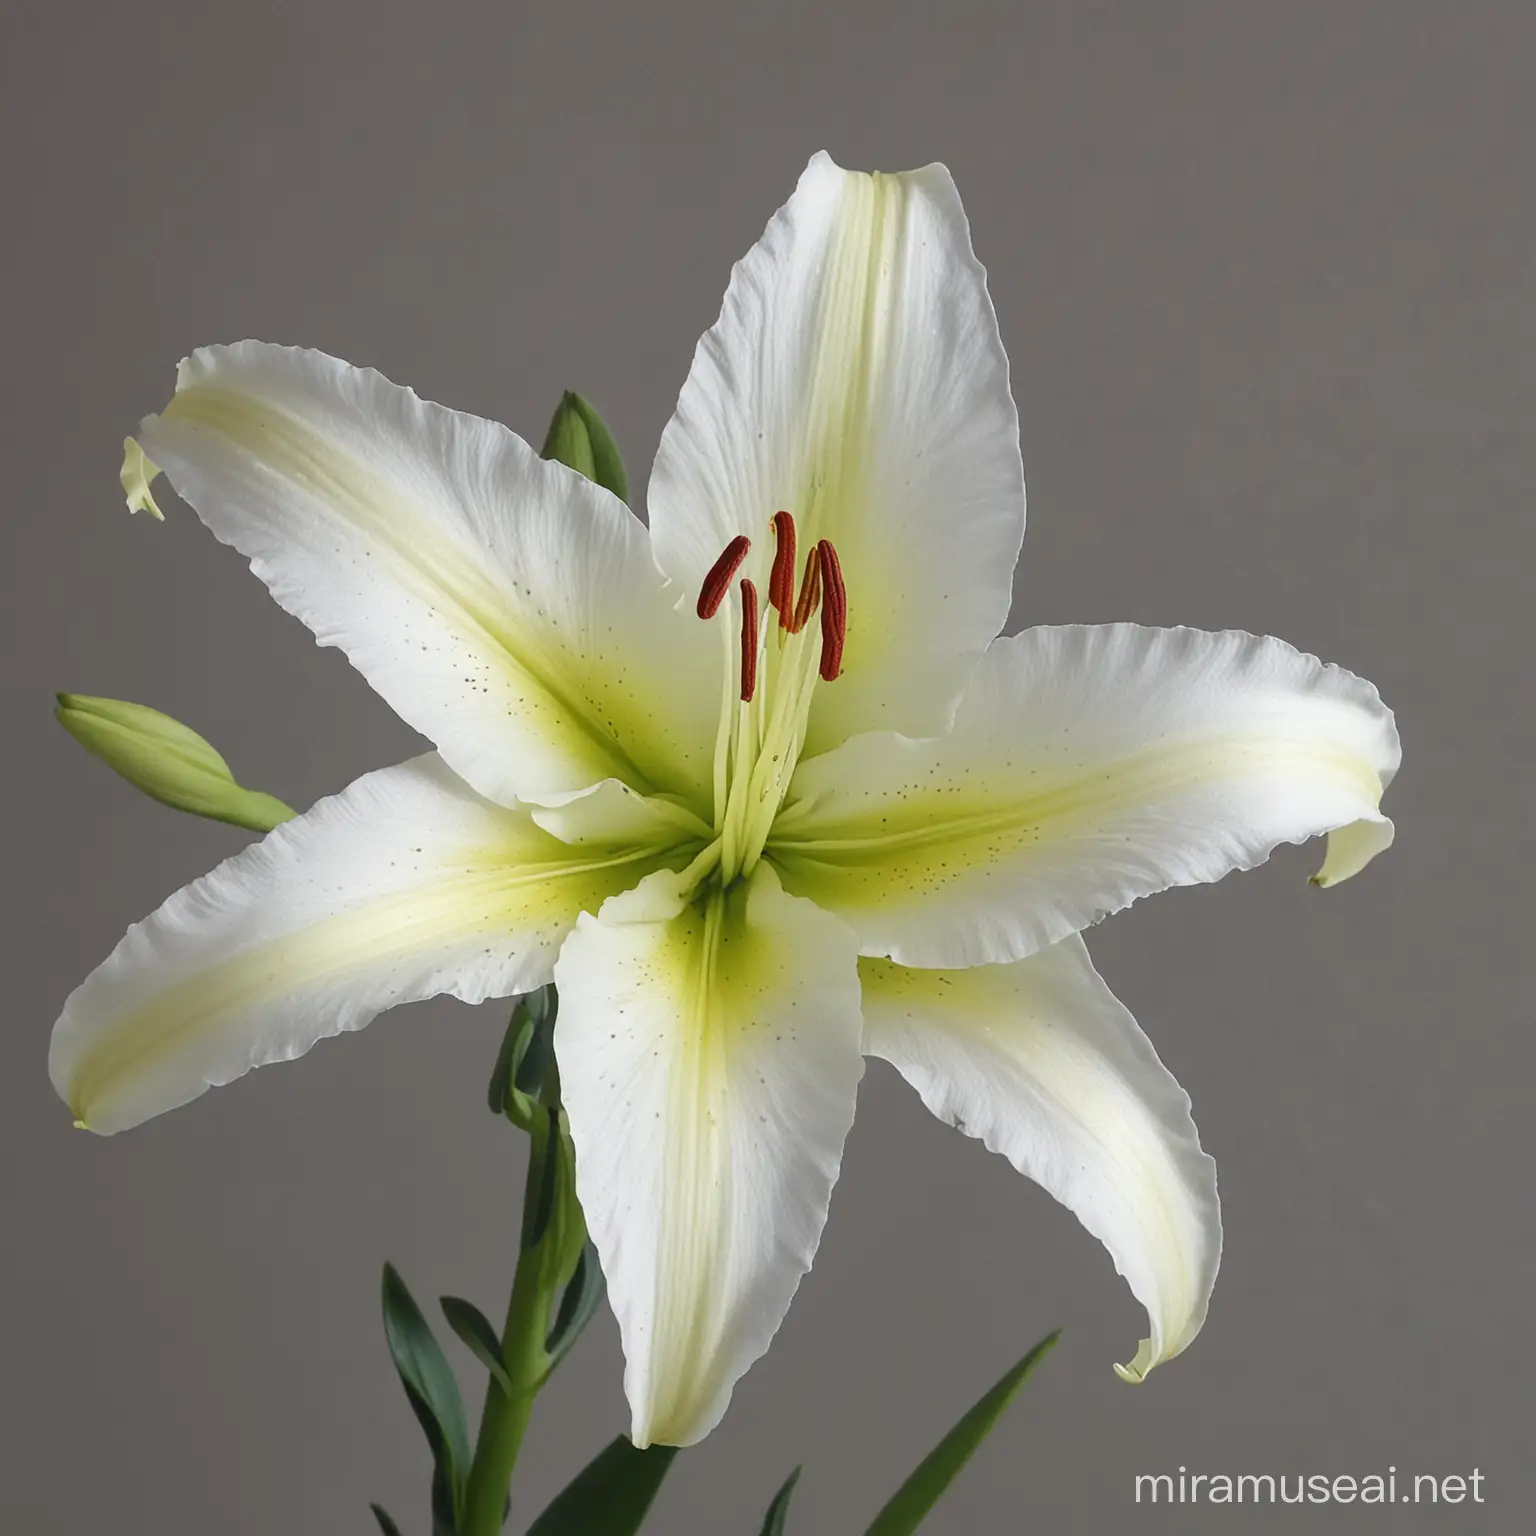 Vibrant Lily Flower Blossoming in Solitude